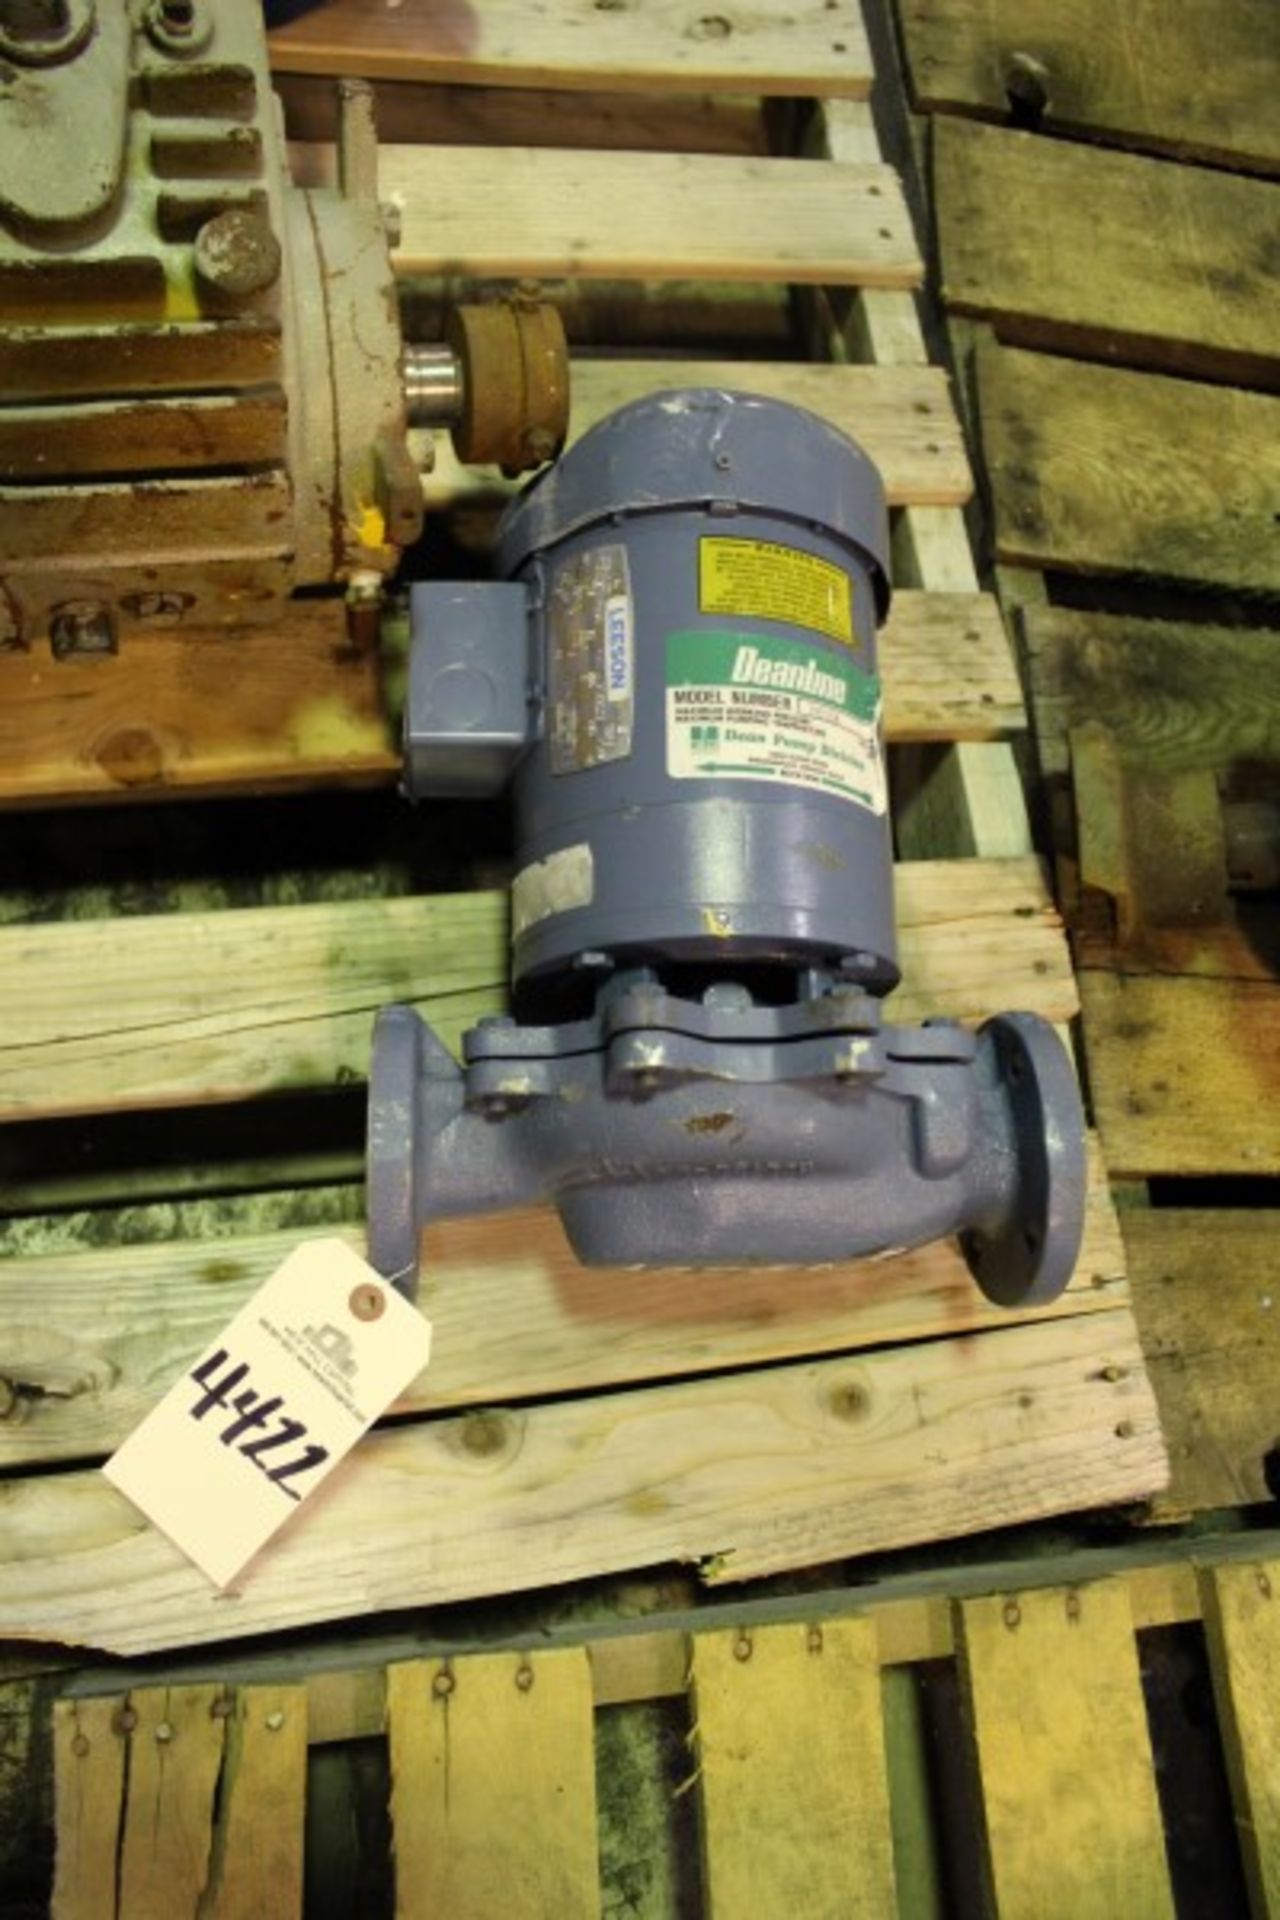 Dean Line 190158 Pump, 1/2 HP | Seller to load for $10 per lot or buyers may remove hand carry items